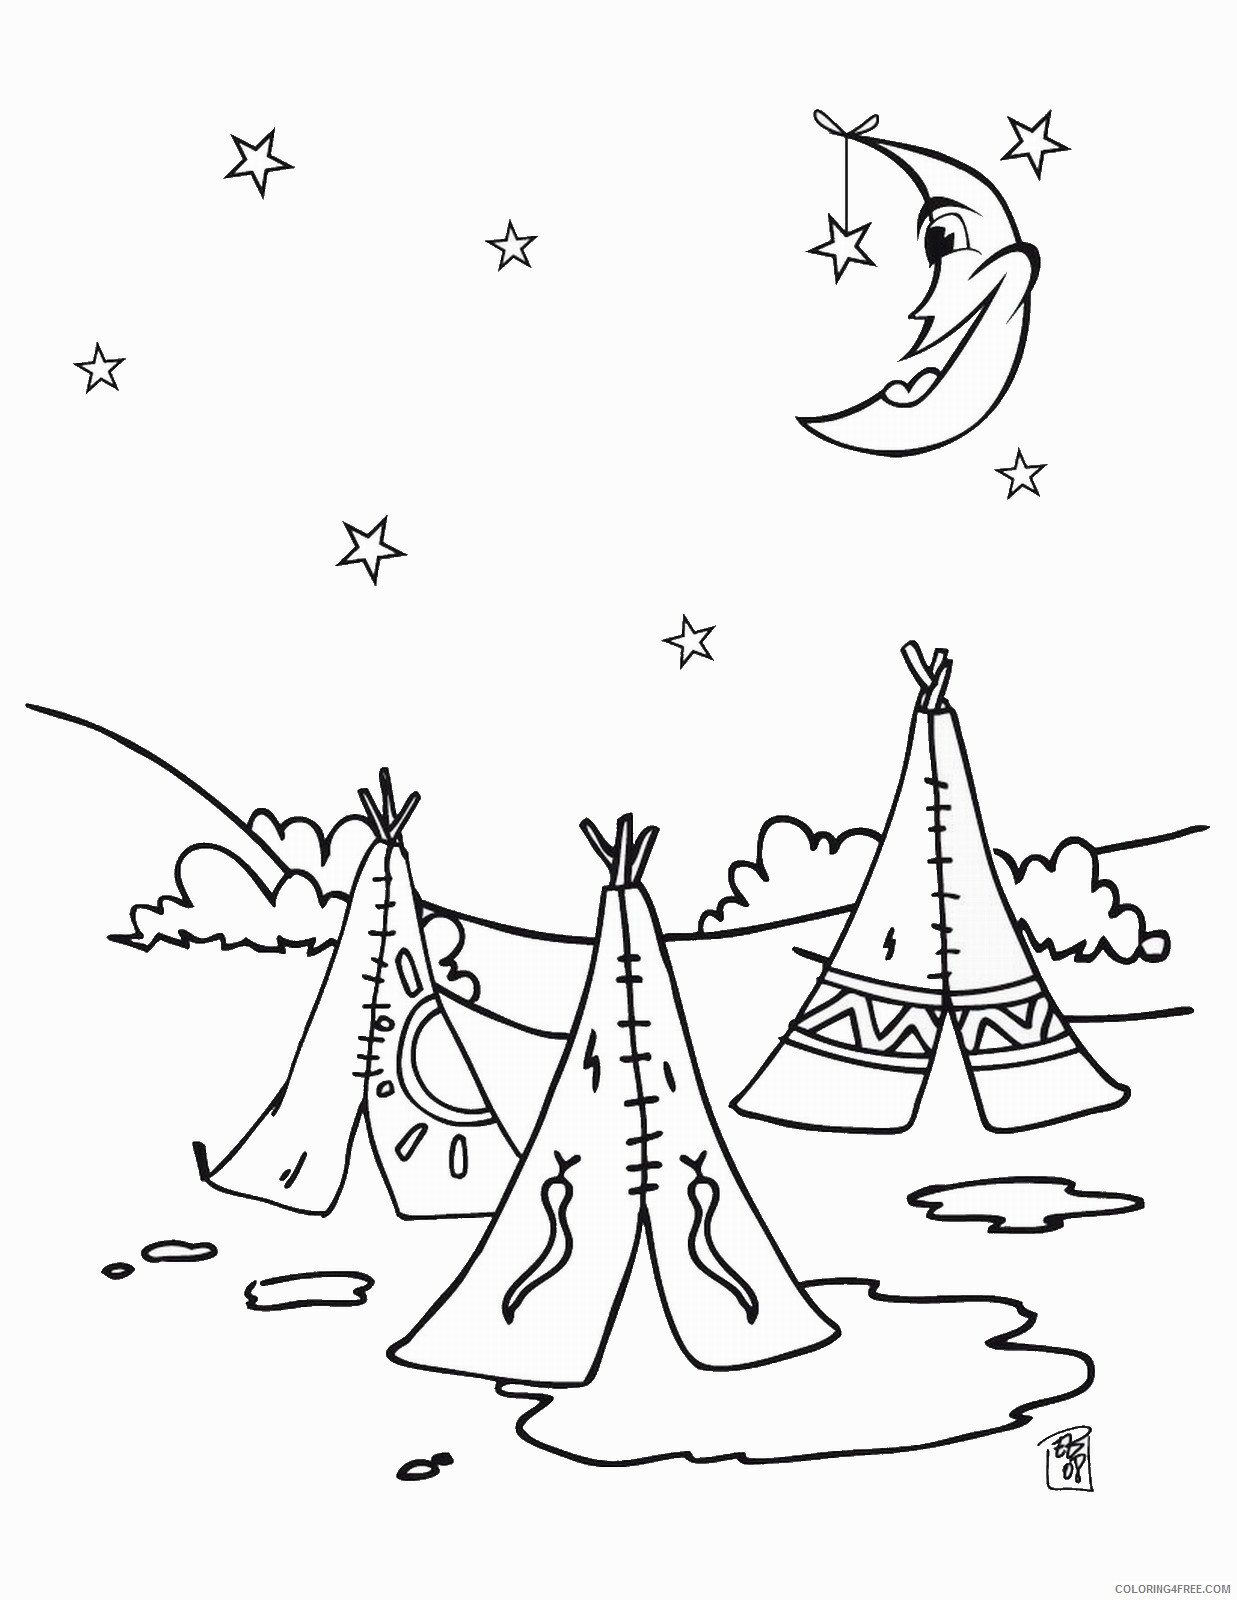 Indian Coloring Pages indians_08 Printable 2021 3546 Coloring4free